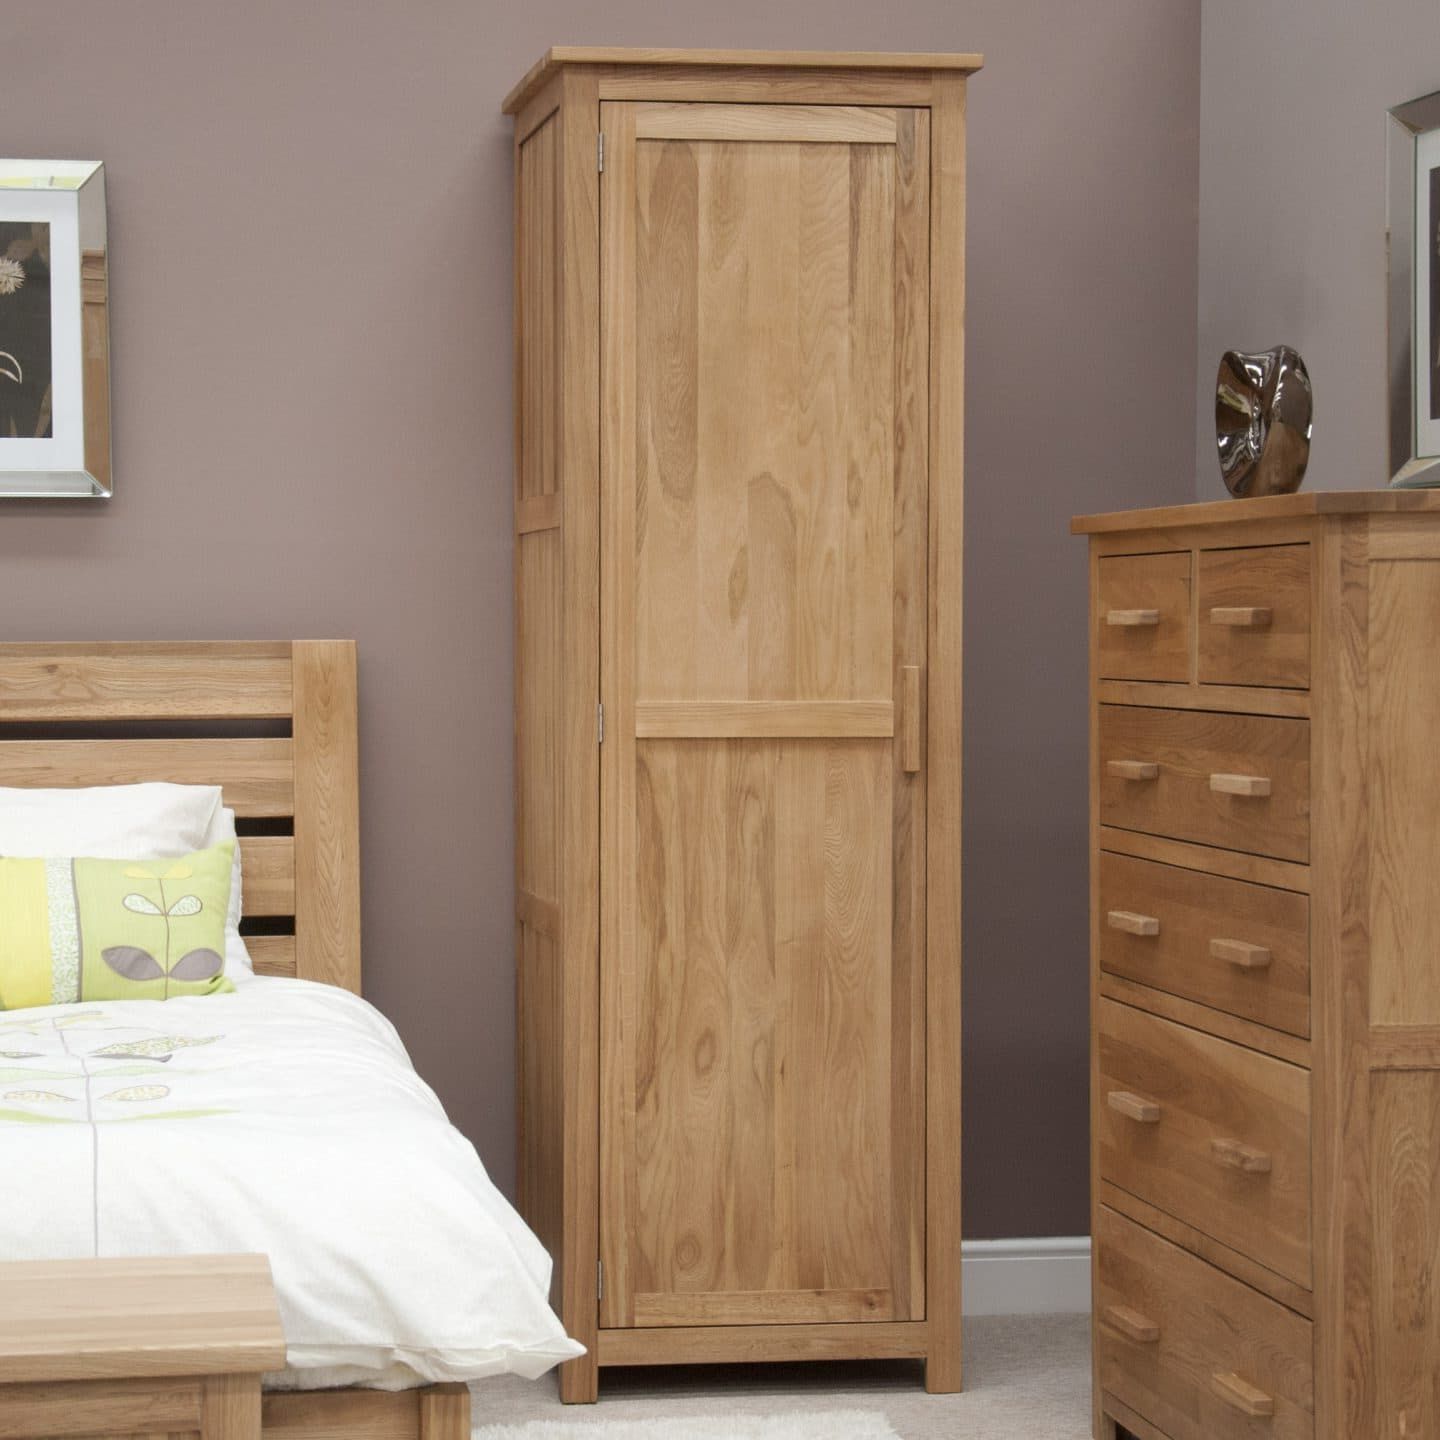 Harwell Oak Single Wardrobe – Only Oak Furniture – Free Delivery Throughout Single Oak Wardrobes With Drawers (View 5 of 20)